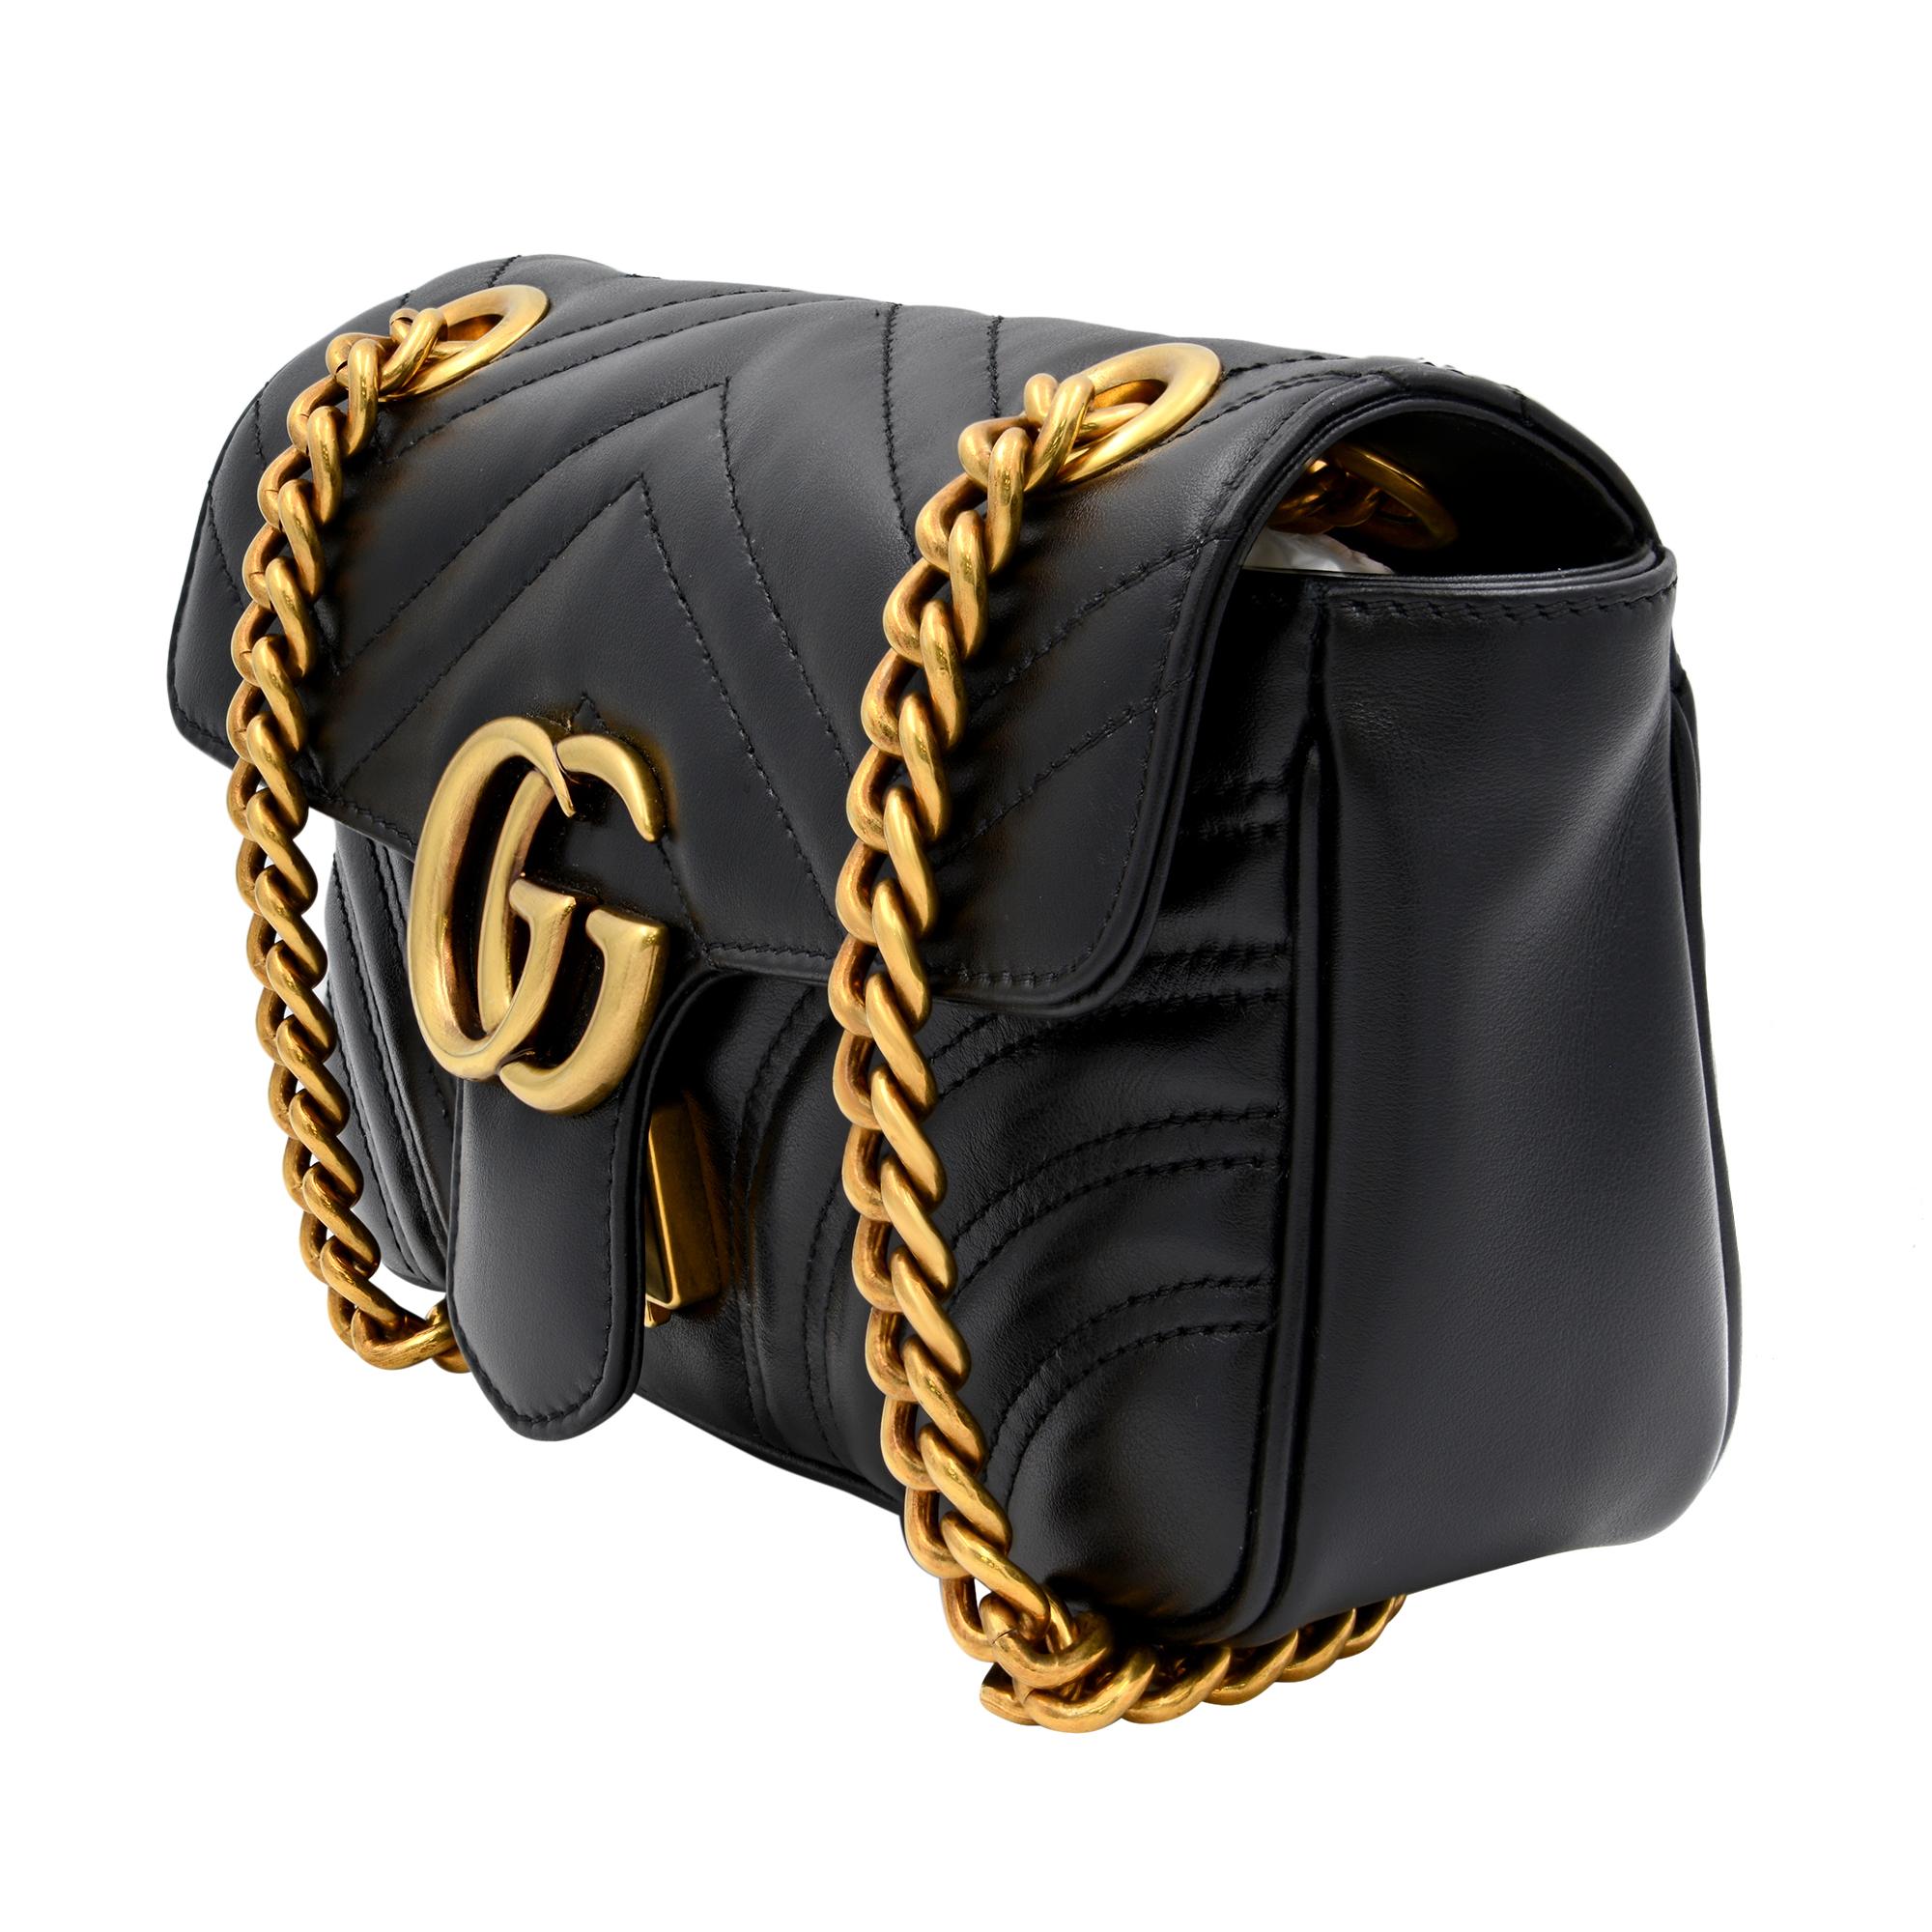 This small Gucci GG Marmont chain shoulder black leather bag has a softly structured shape and an oversized flap closure with Double G hardware. The sliding chain strap can be worn multiple ways, changing between a shoulder and a top handle bag.